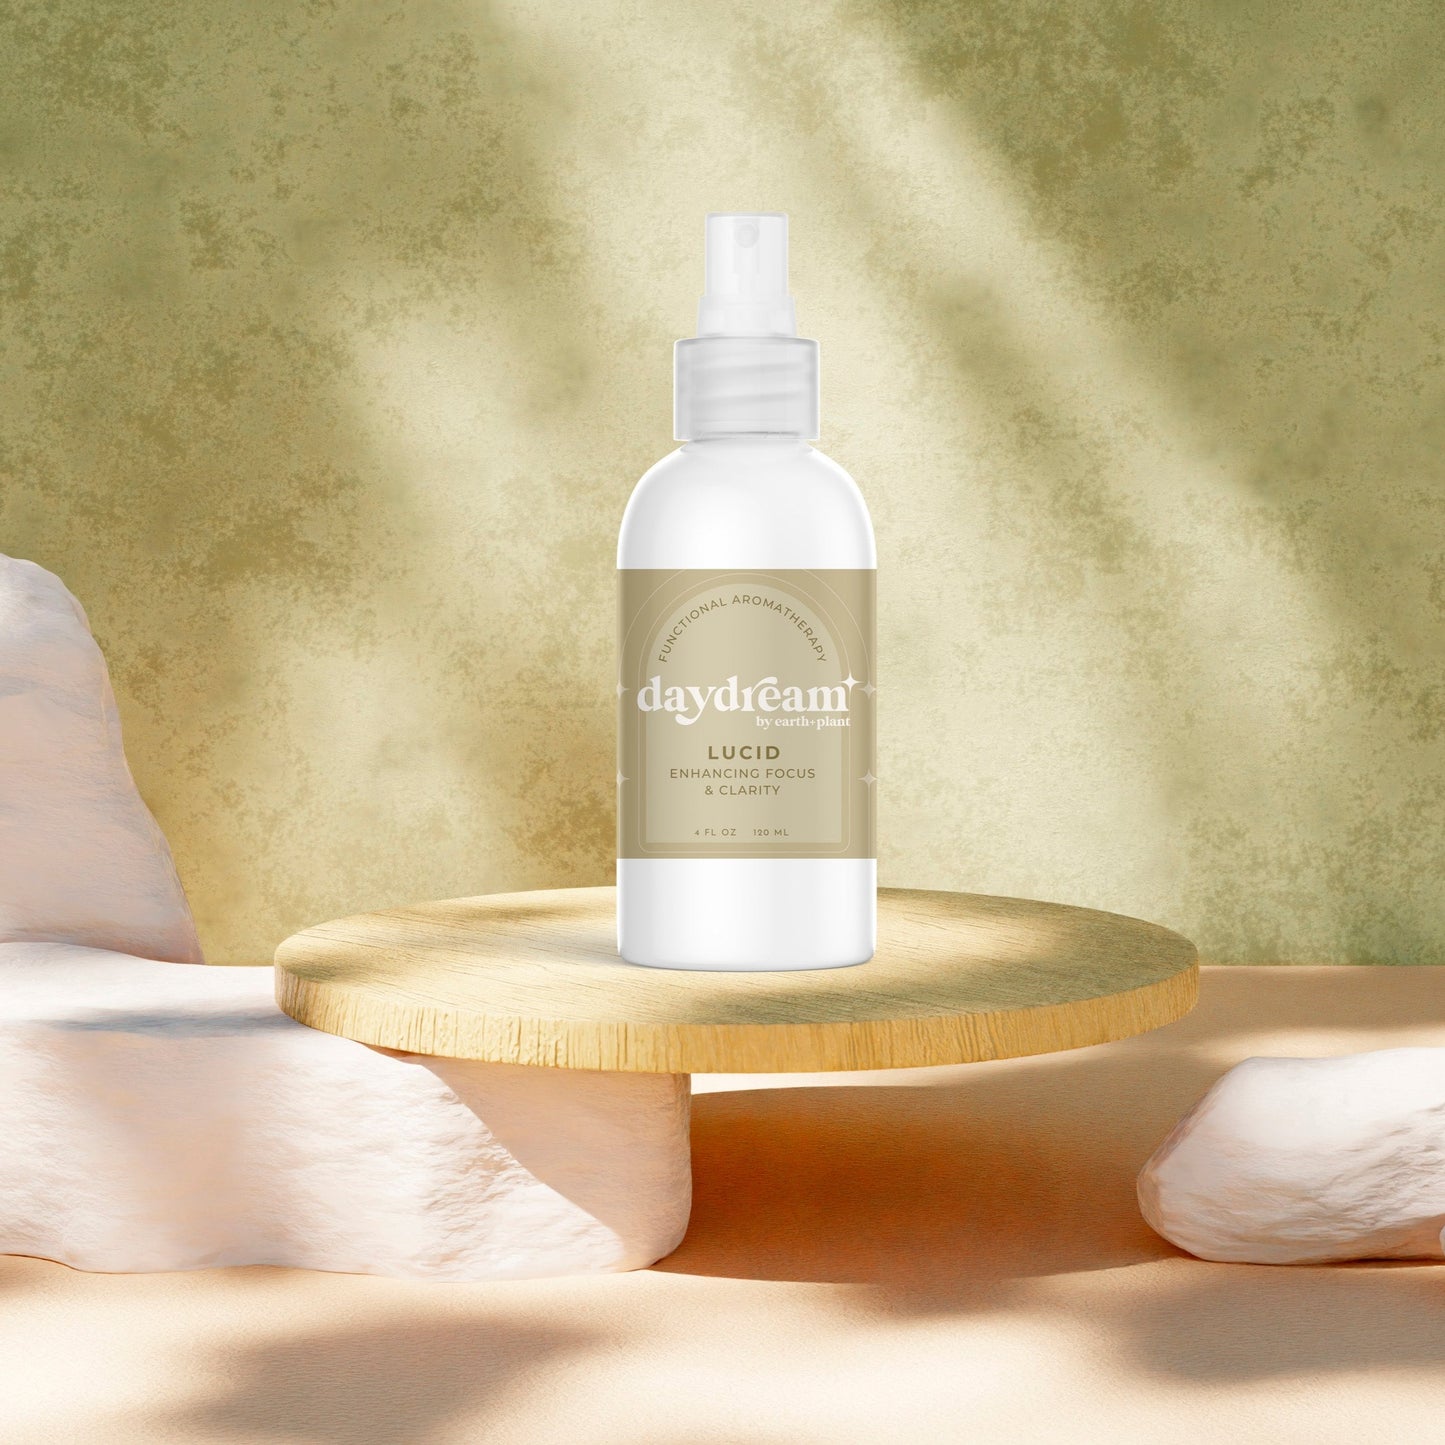 Daydream Lucid Focus & Clarity - Functional Aromatherapy Spray